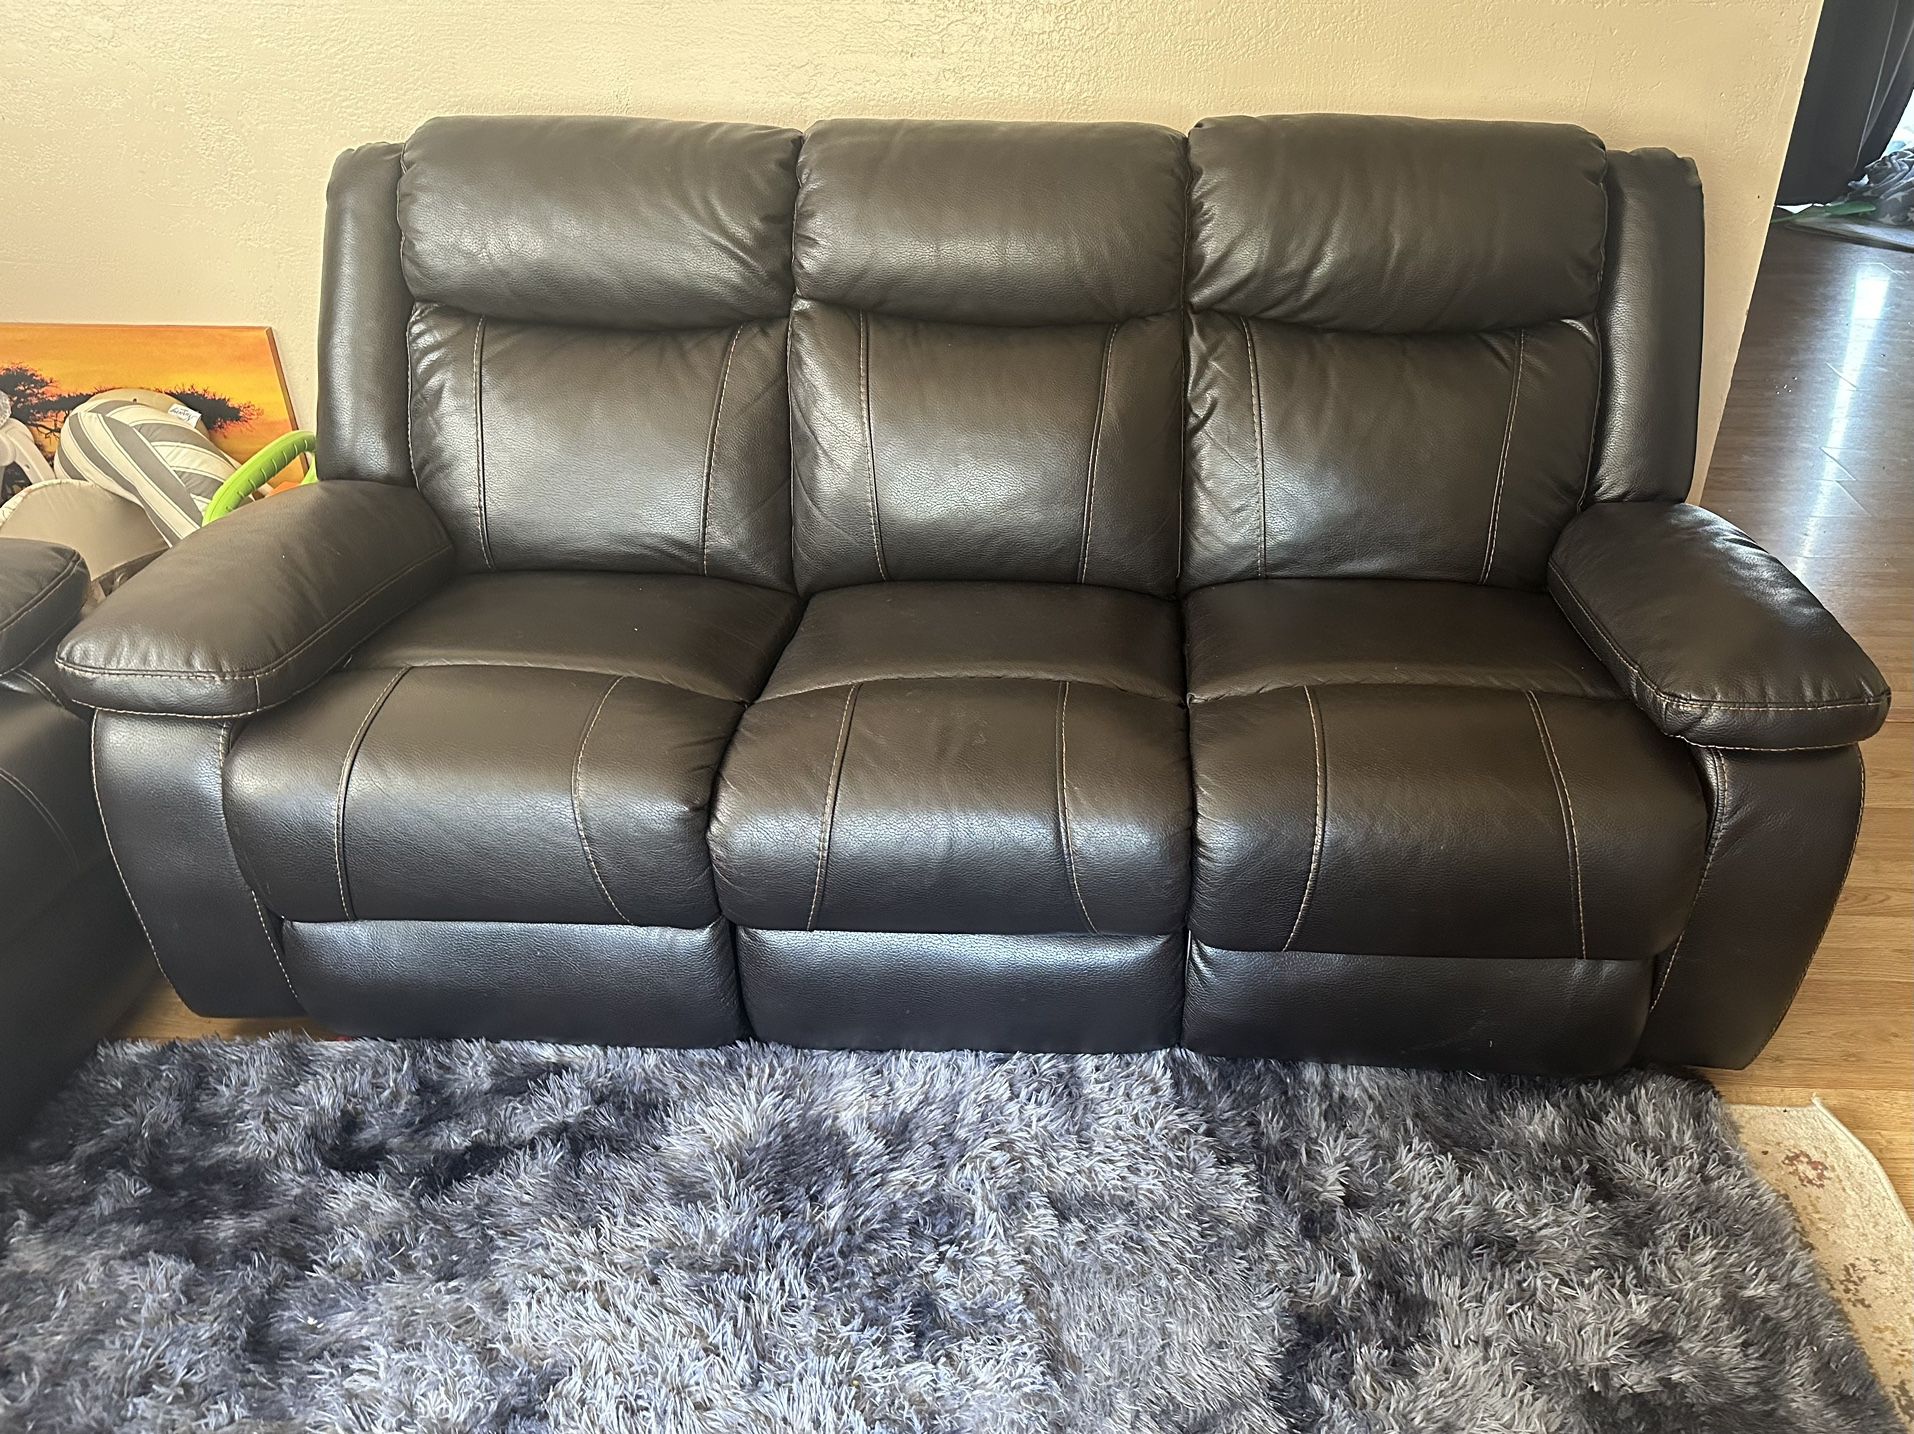 Recliner loveseat and Couch ( 2 seats and 3 seats couch)